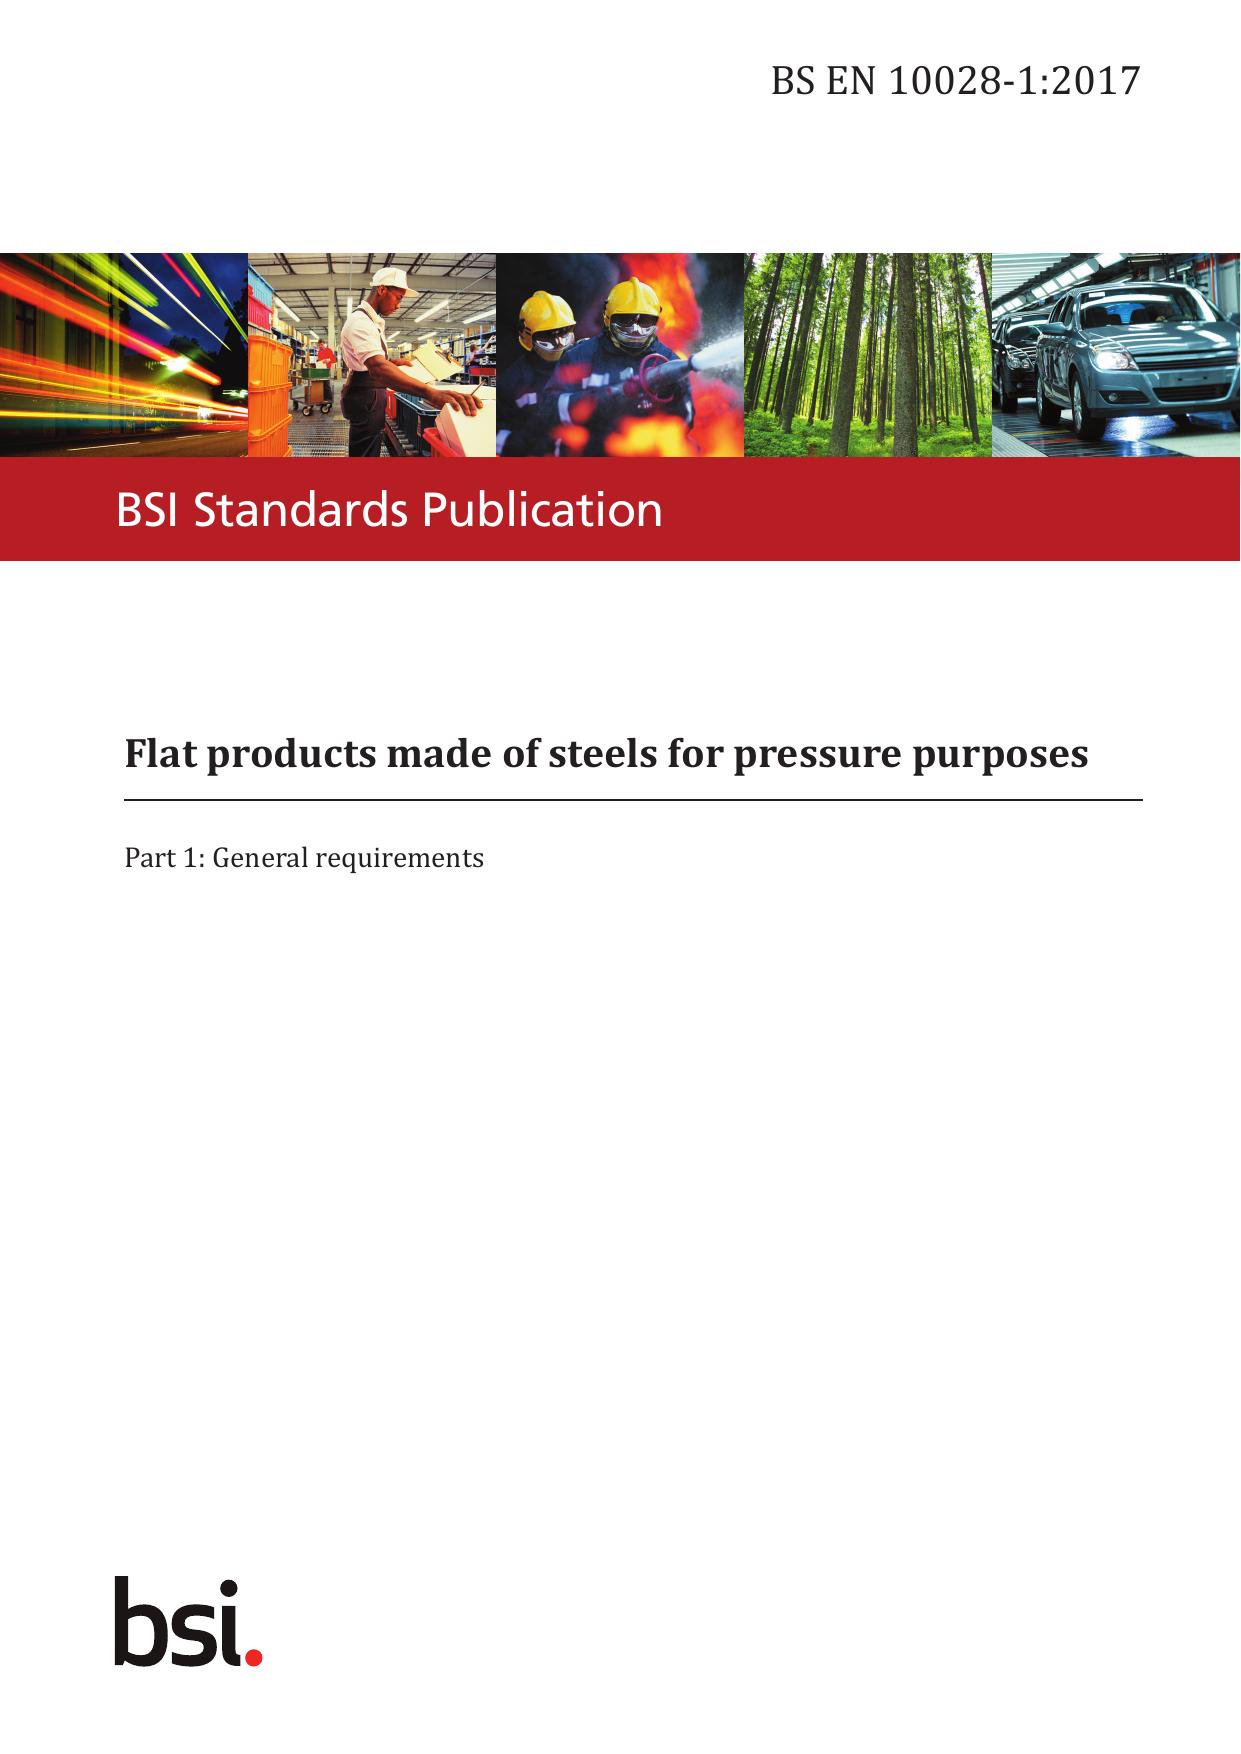 BS EN 10028-1:2017 by The British Standards Institution